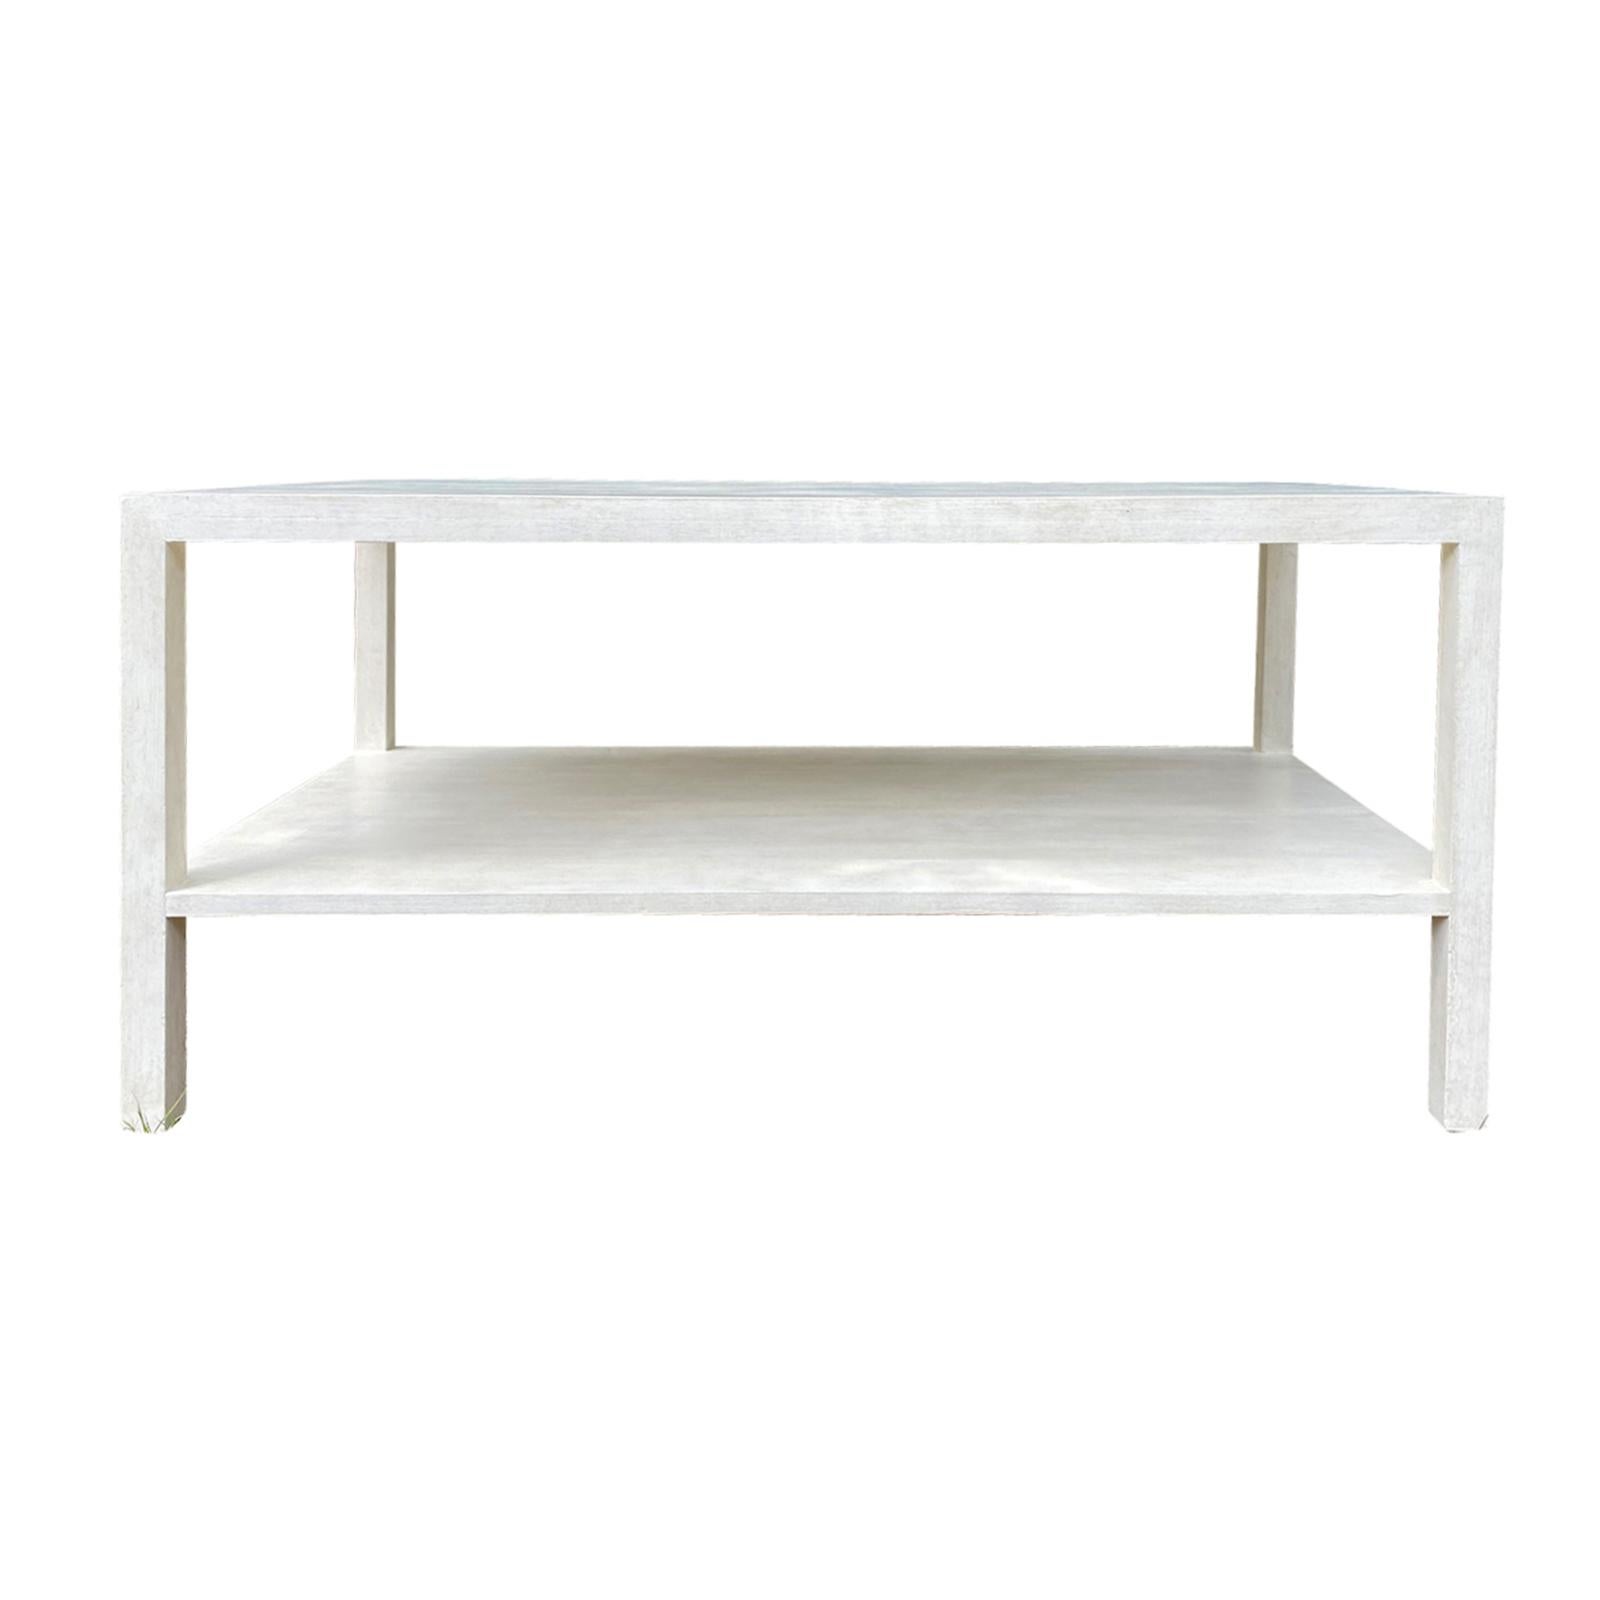 Mid-20th Century Painted Two-Tier Coffee Table, Custom Finish For Sale